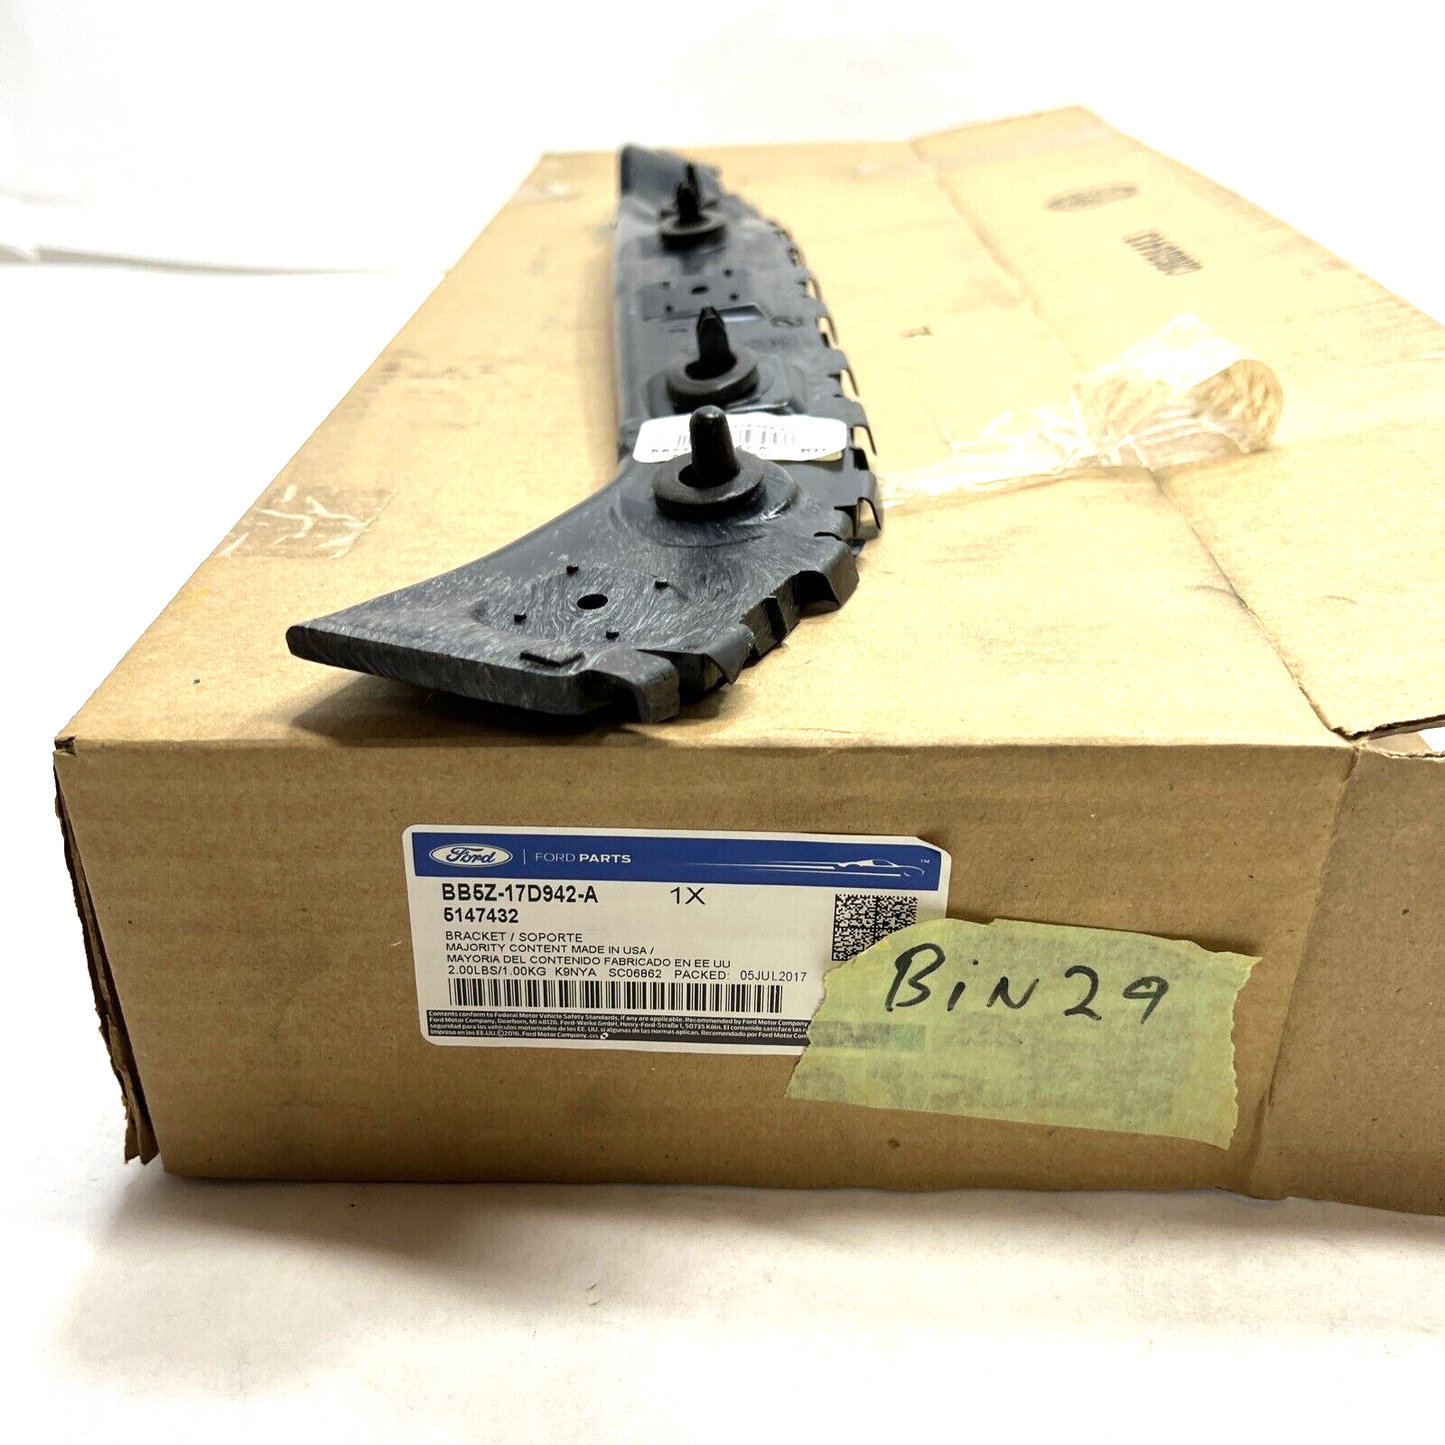 New Ford OEM Right Rear Bumper Mounting Support 11-15 BB5Z-17D942-A